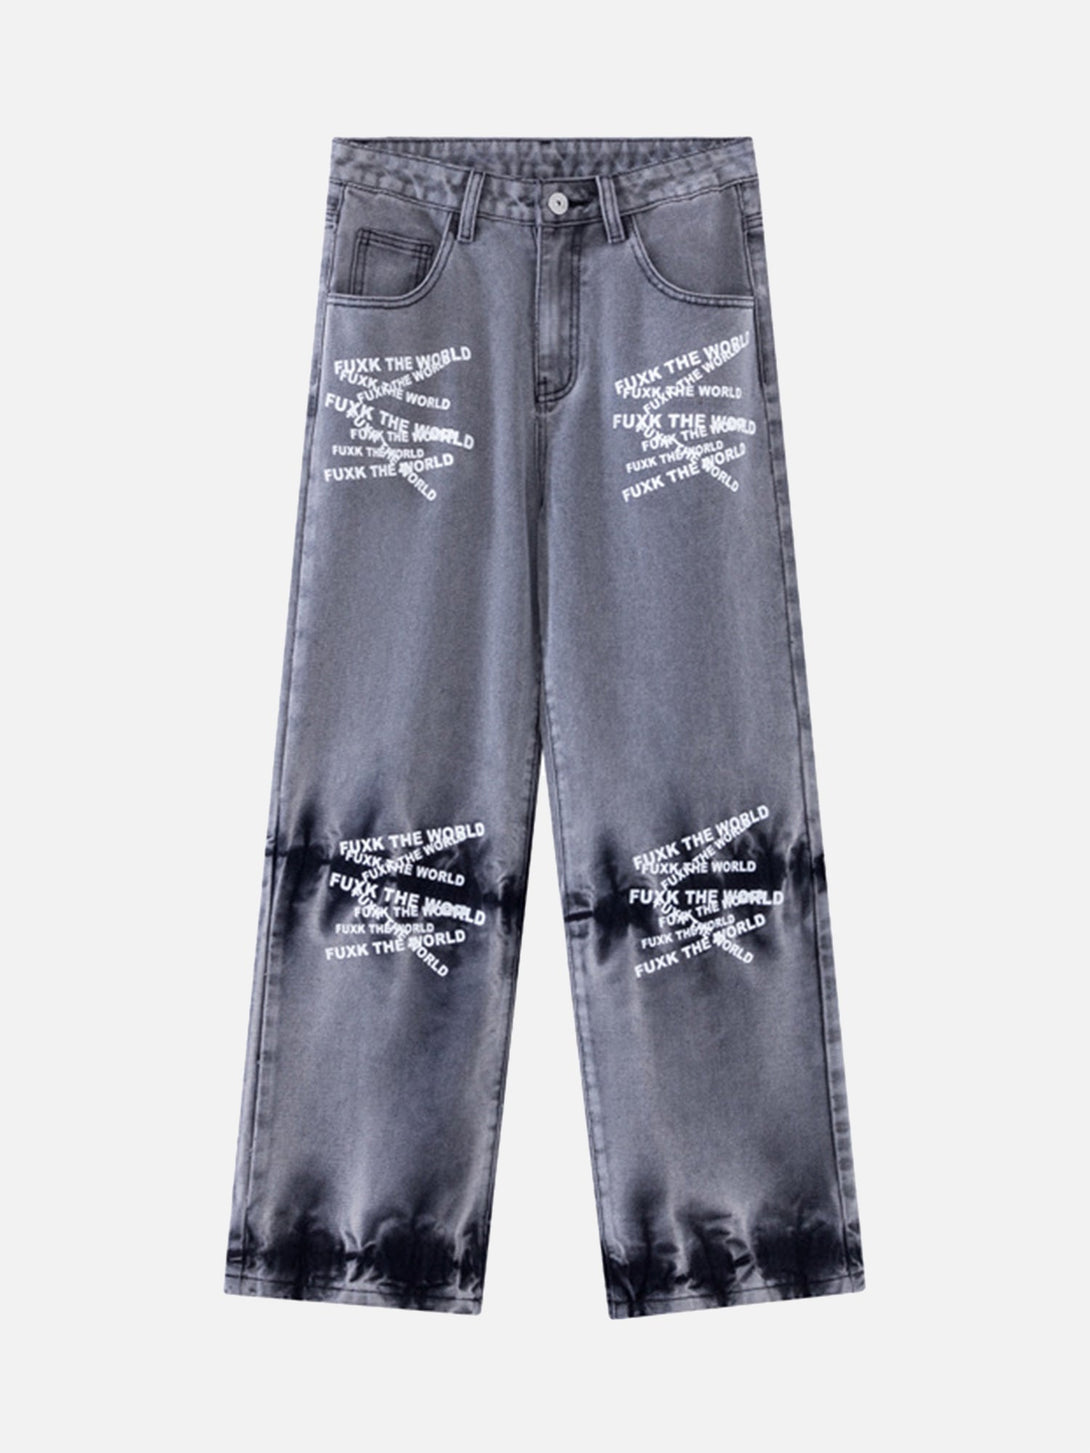 Majesda® - Niche Design Letter Embroidered Tie-dye Gradient Jeans- Outfit Ideas - Streetwear Fashion - majesda.com